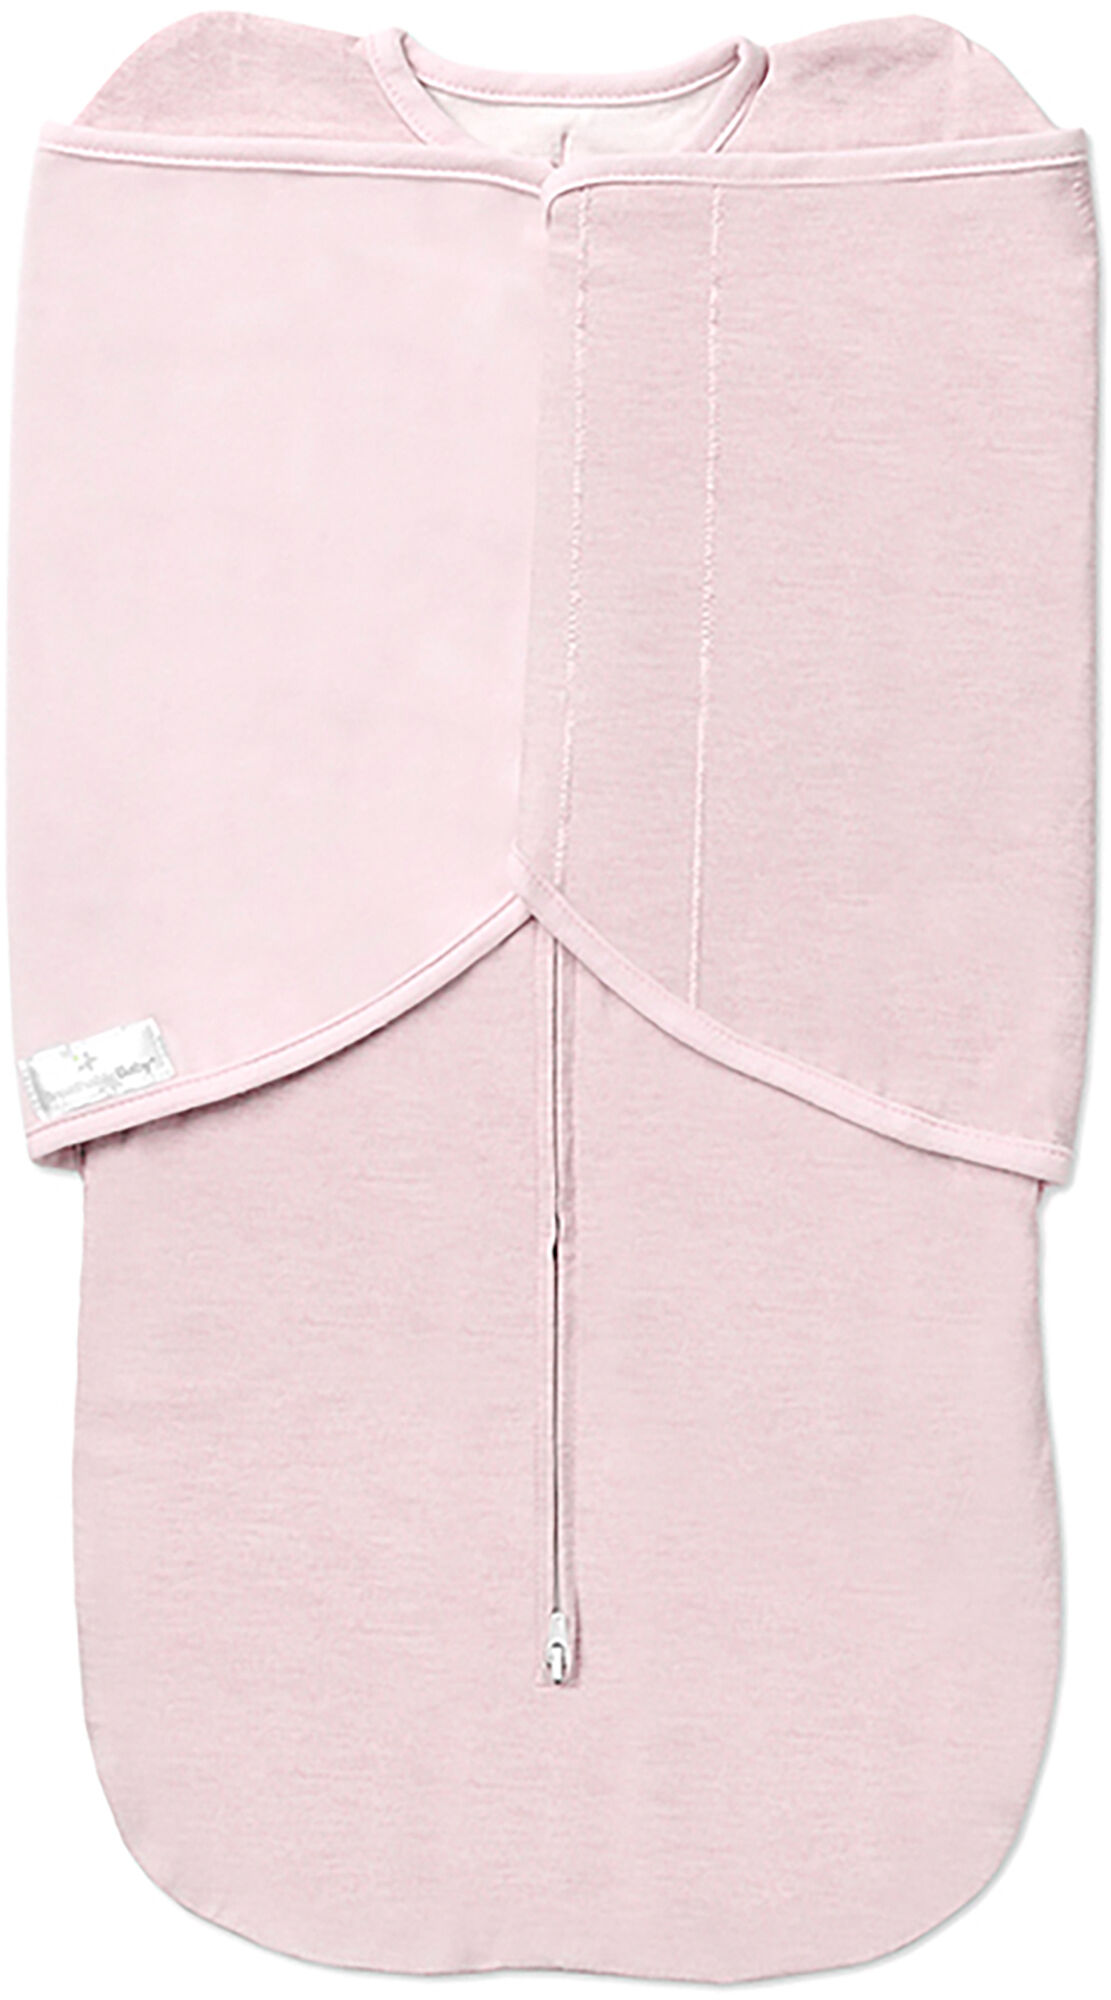 Little Chick London Pucktuch 3-in-1, Rosa